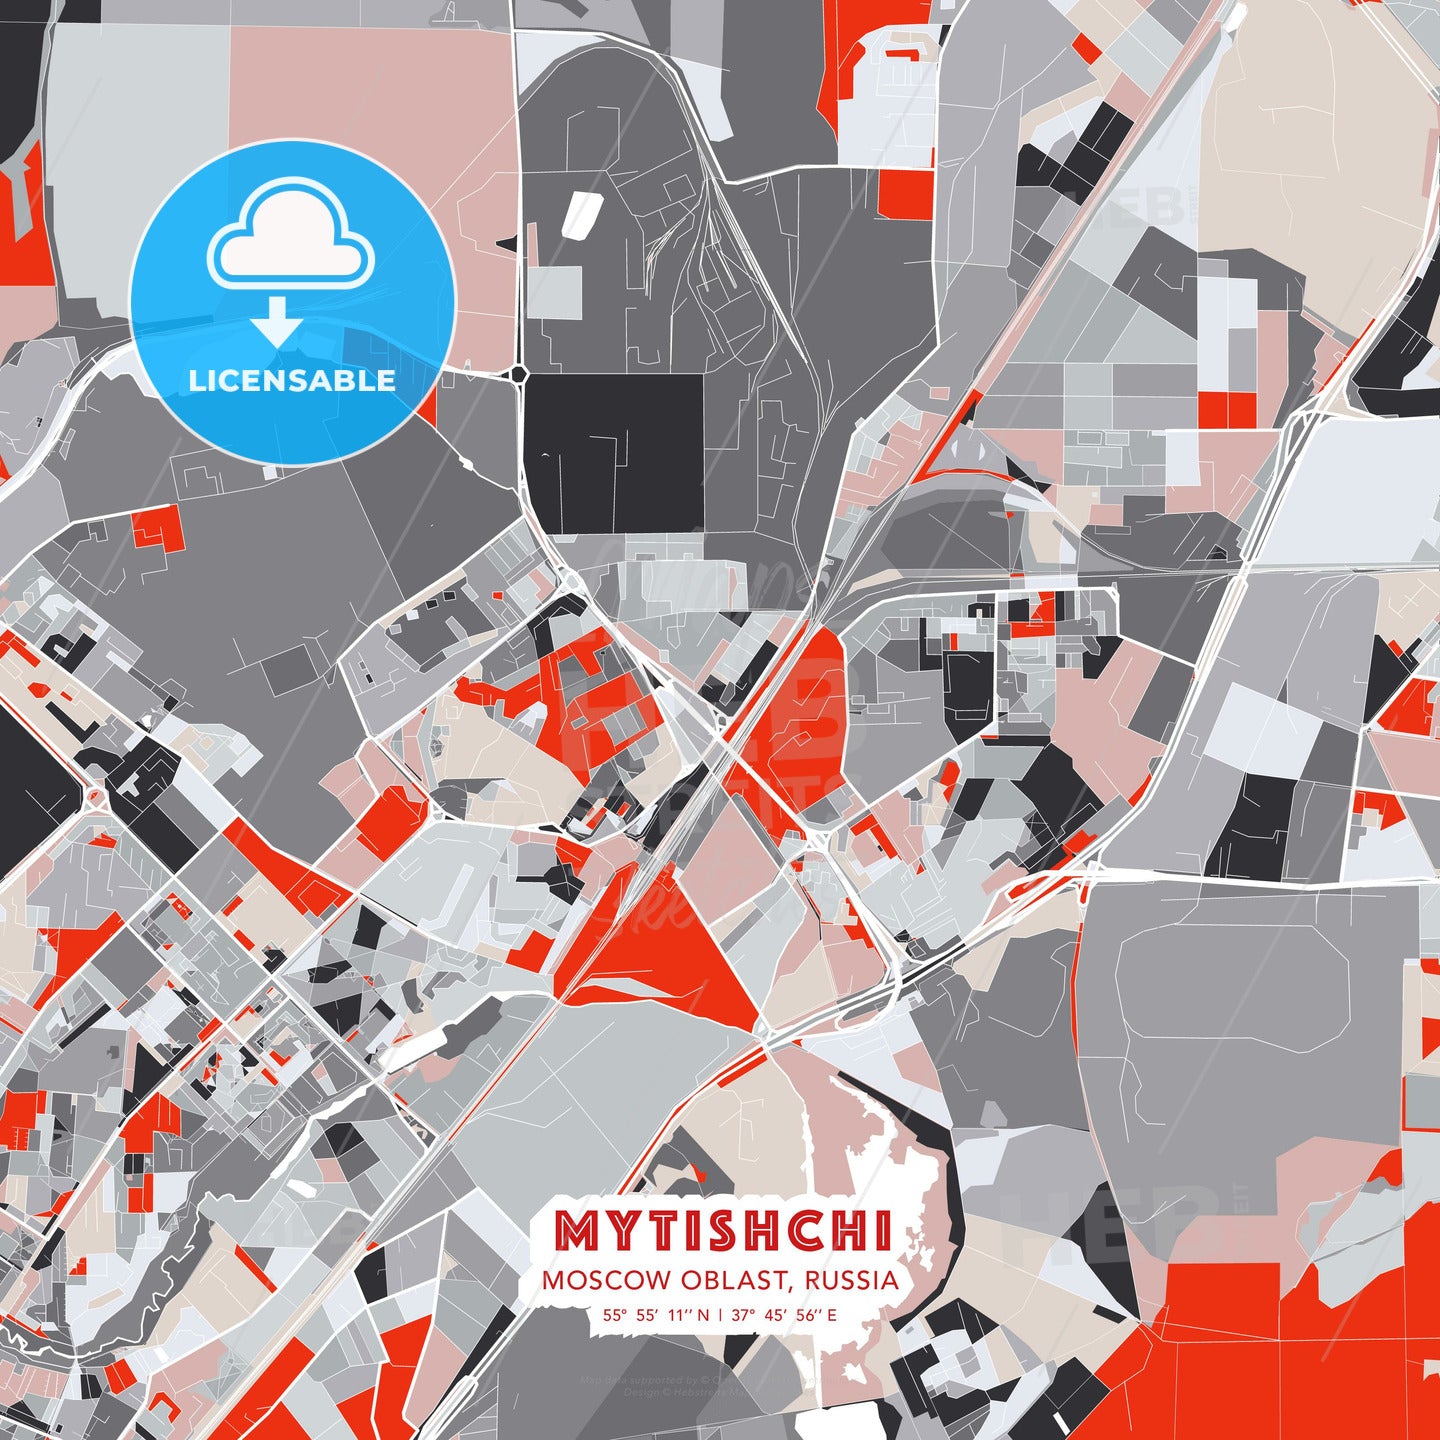 Mytishchi, Moscow Oblast, Russia, modern map - HEBSTREITS Sketches